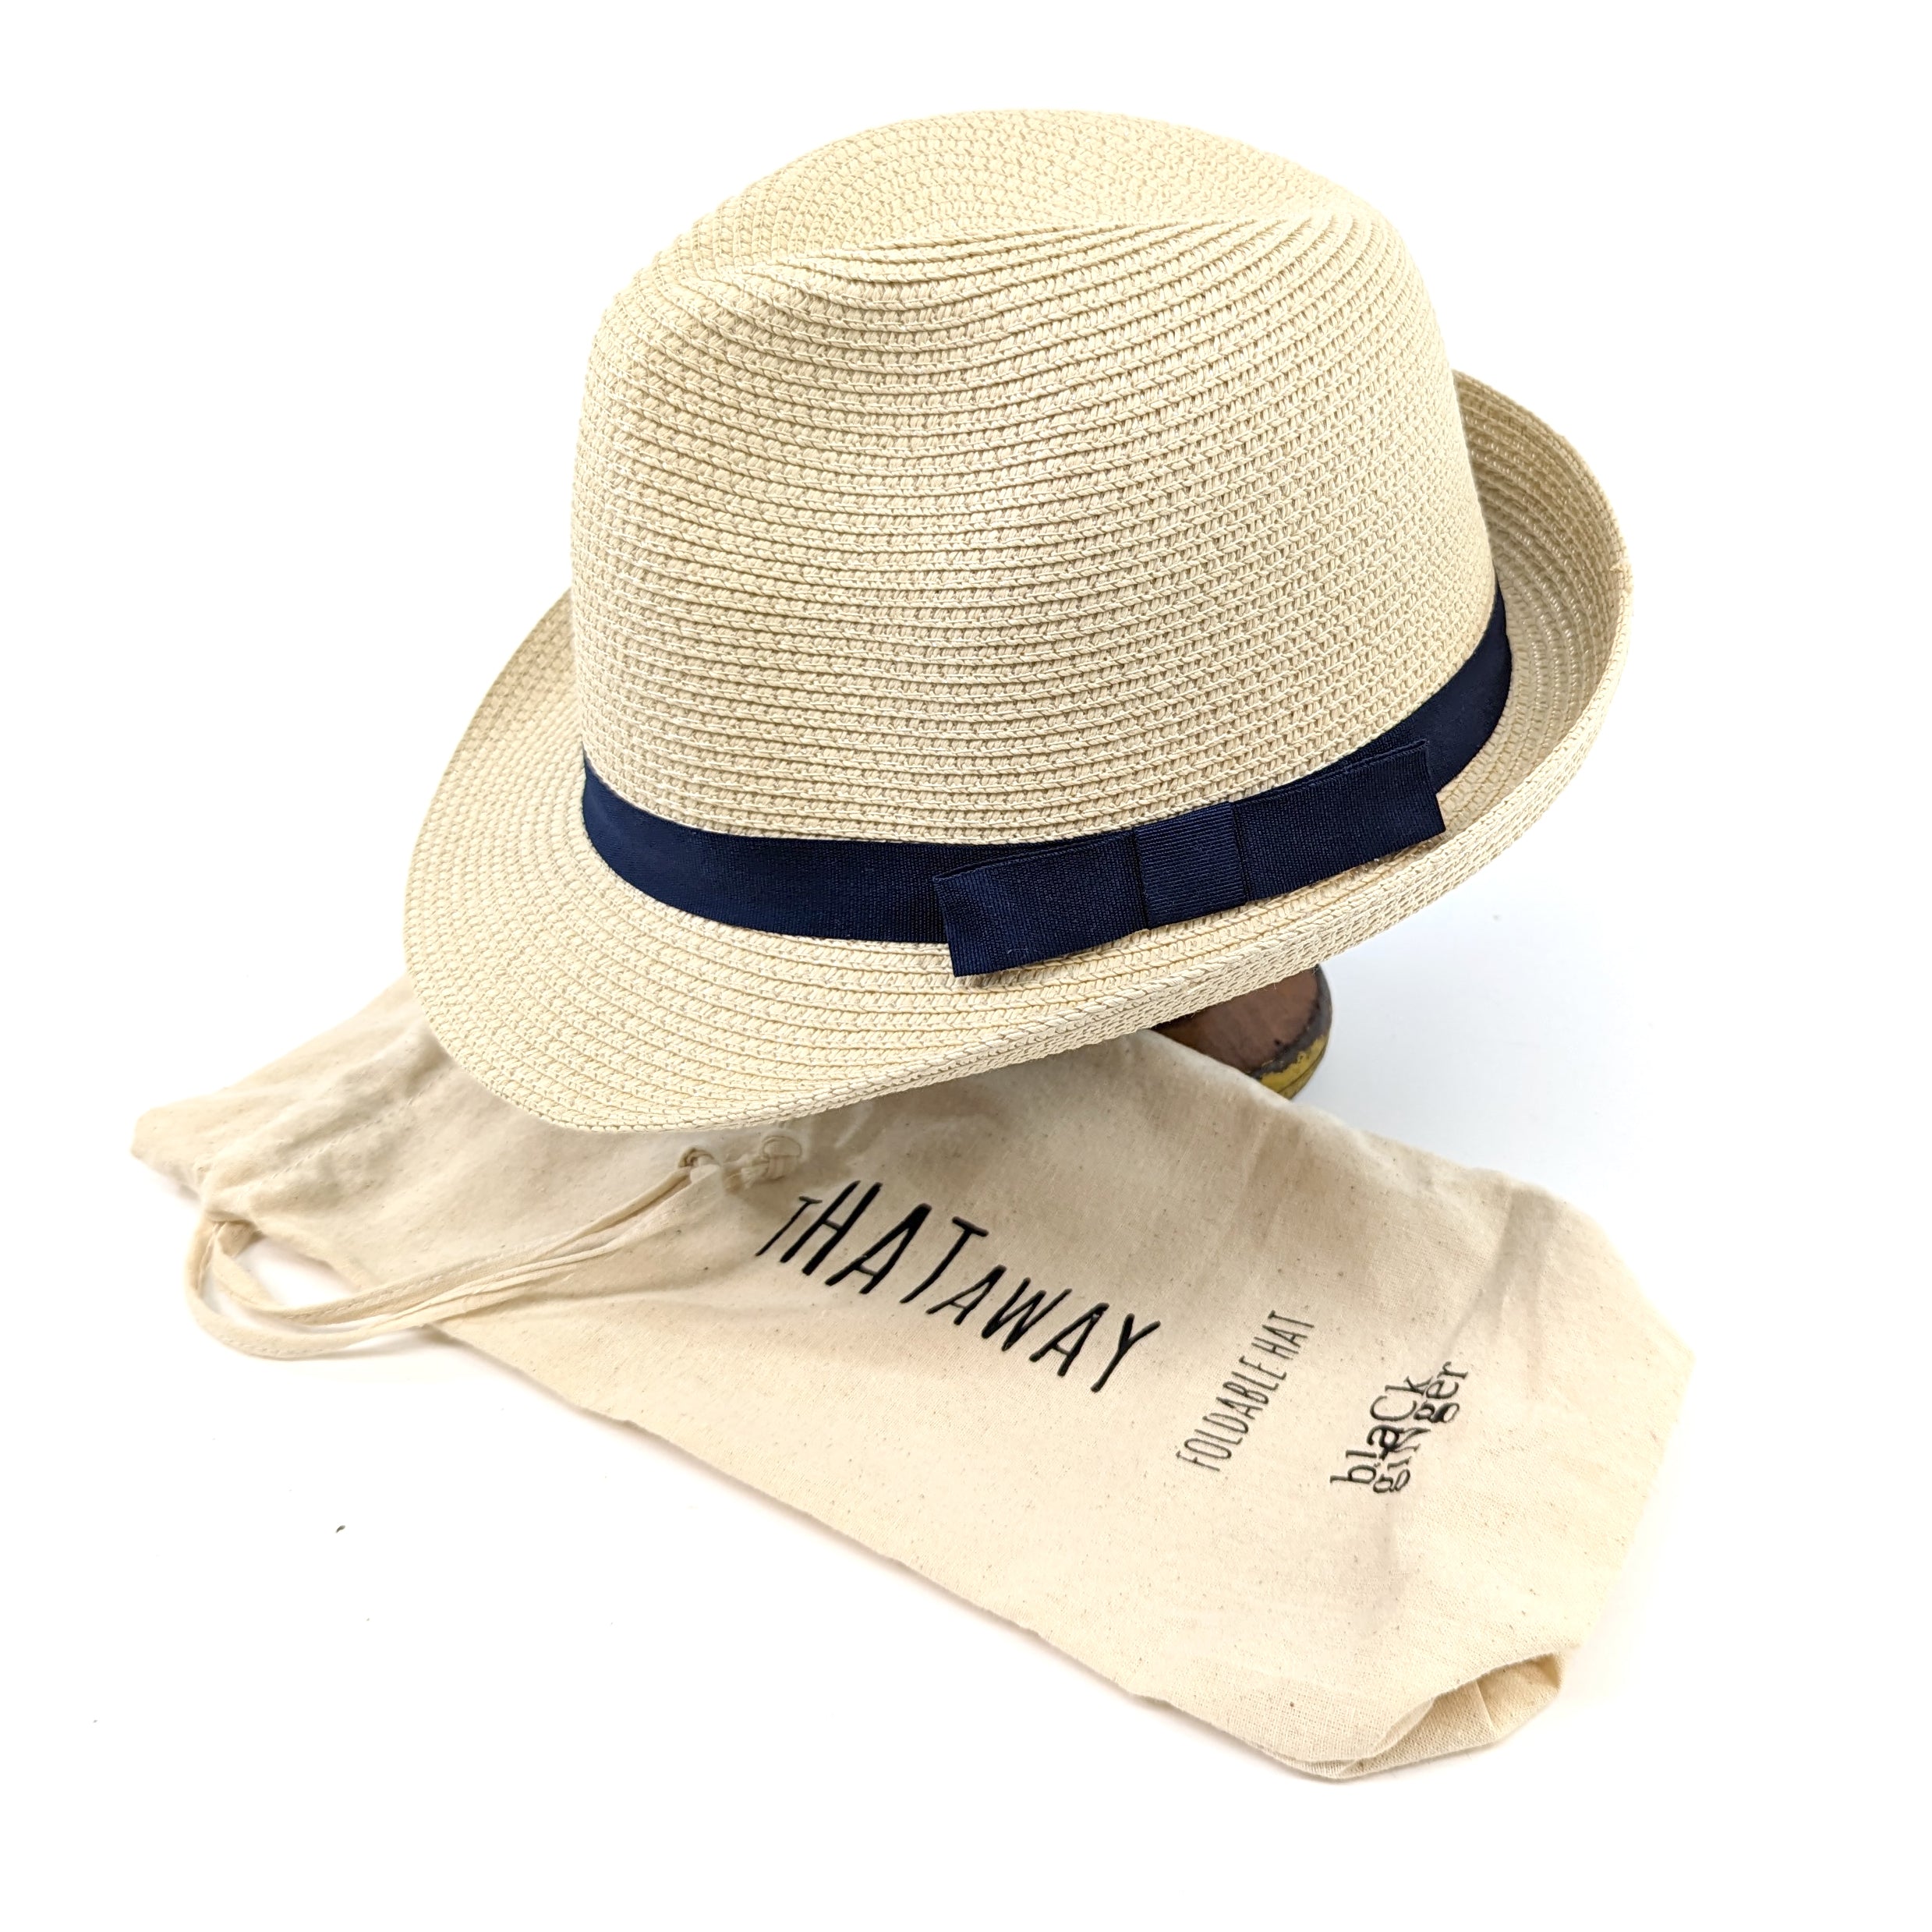 Trilby Style Sun Hat with a Dark Blue Band (57cm)